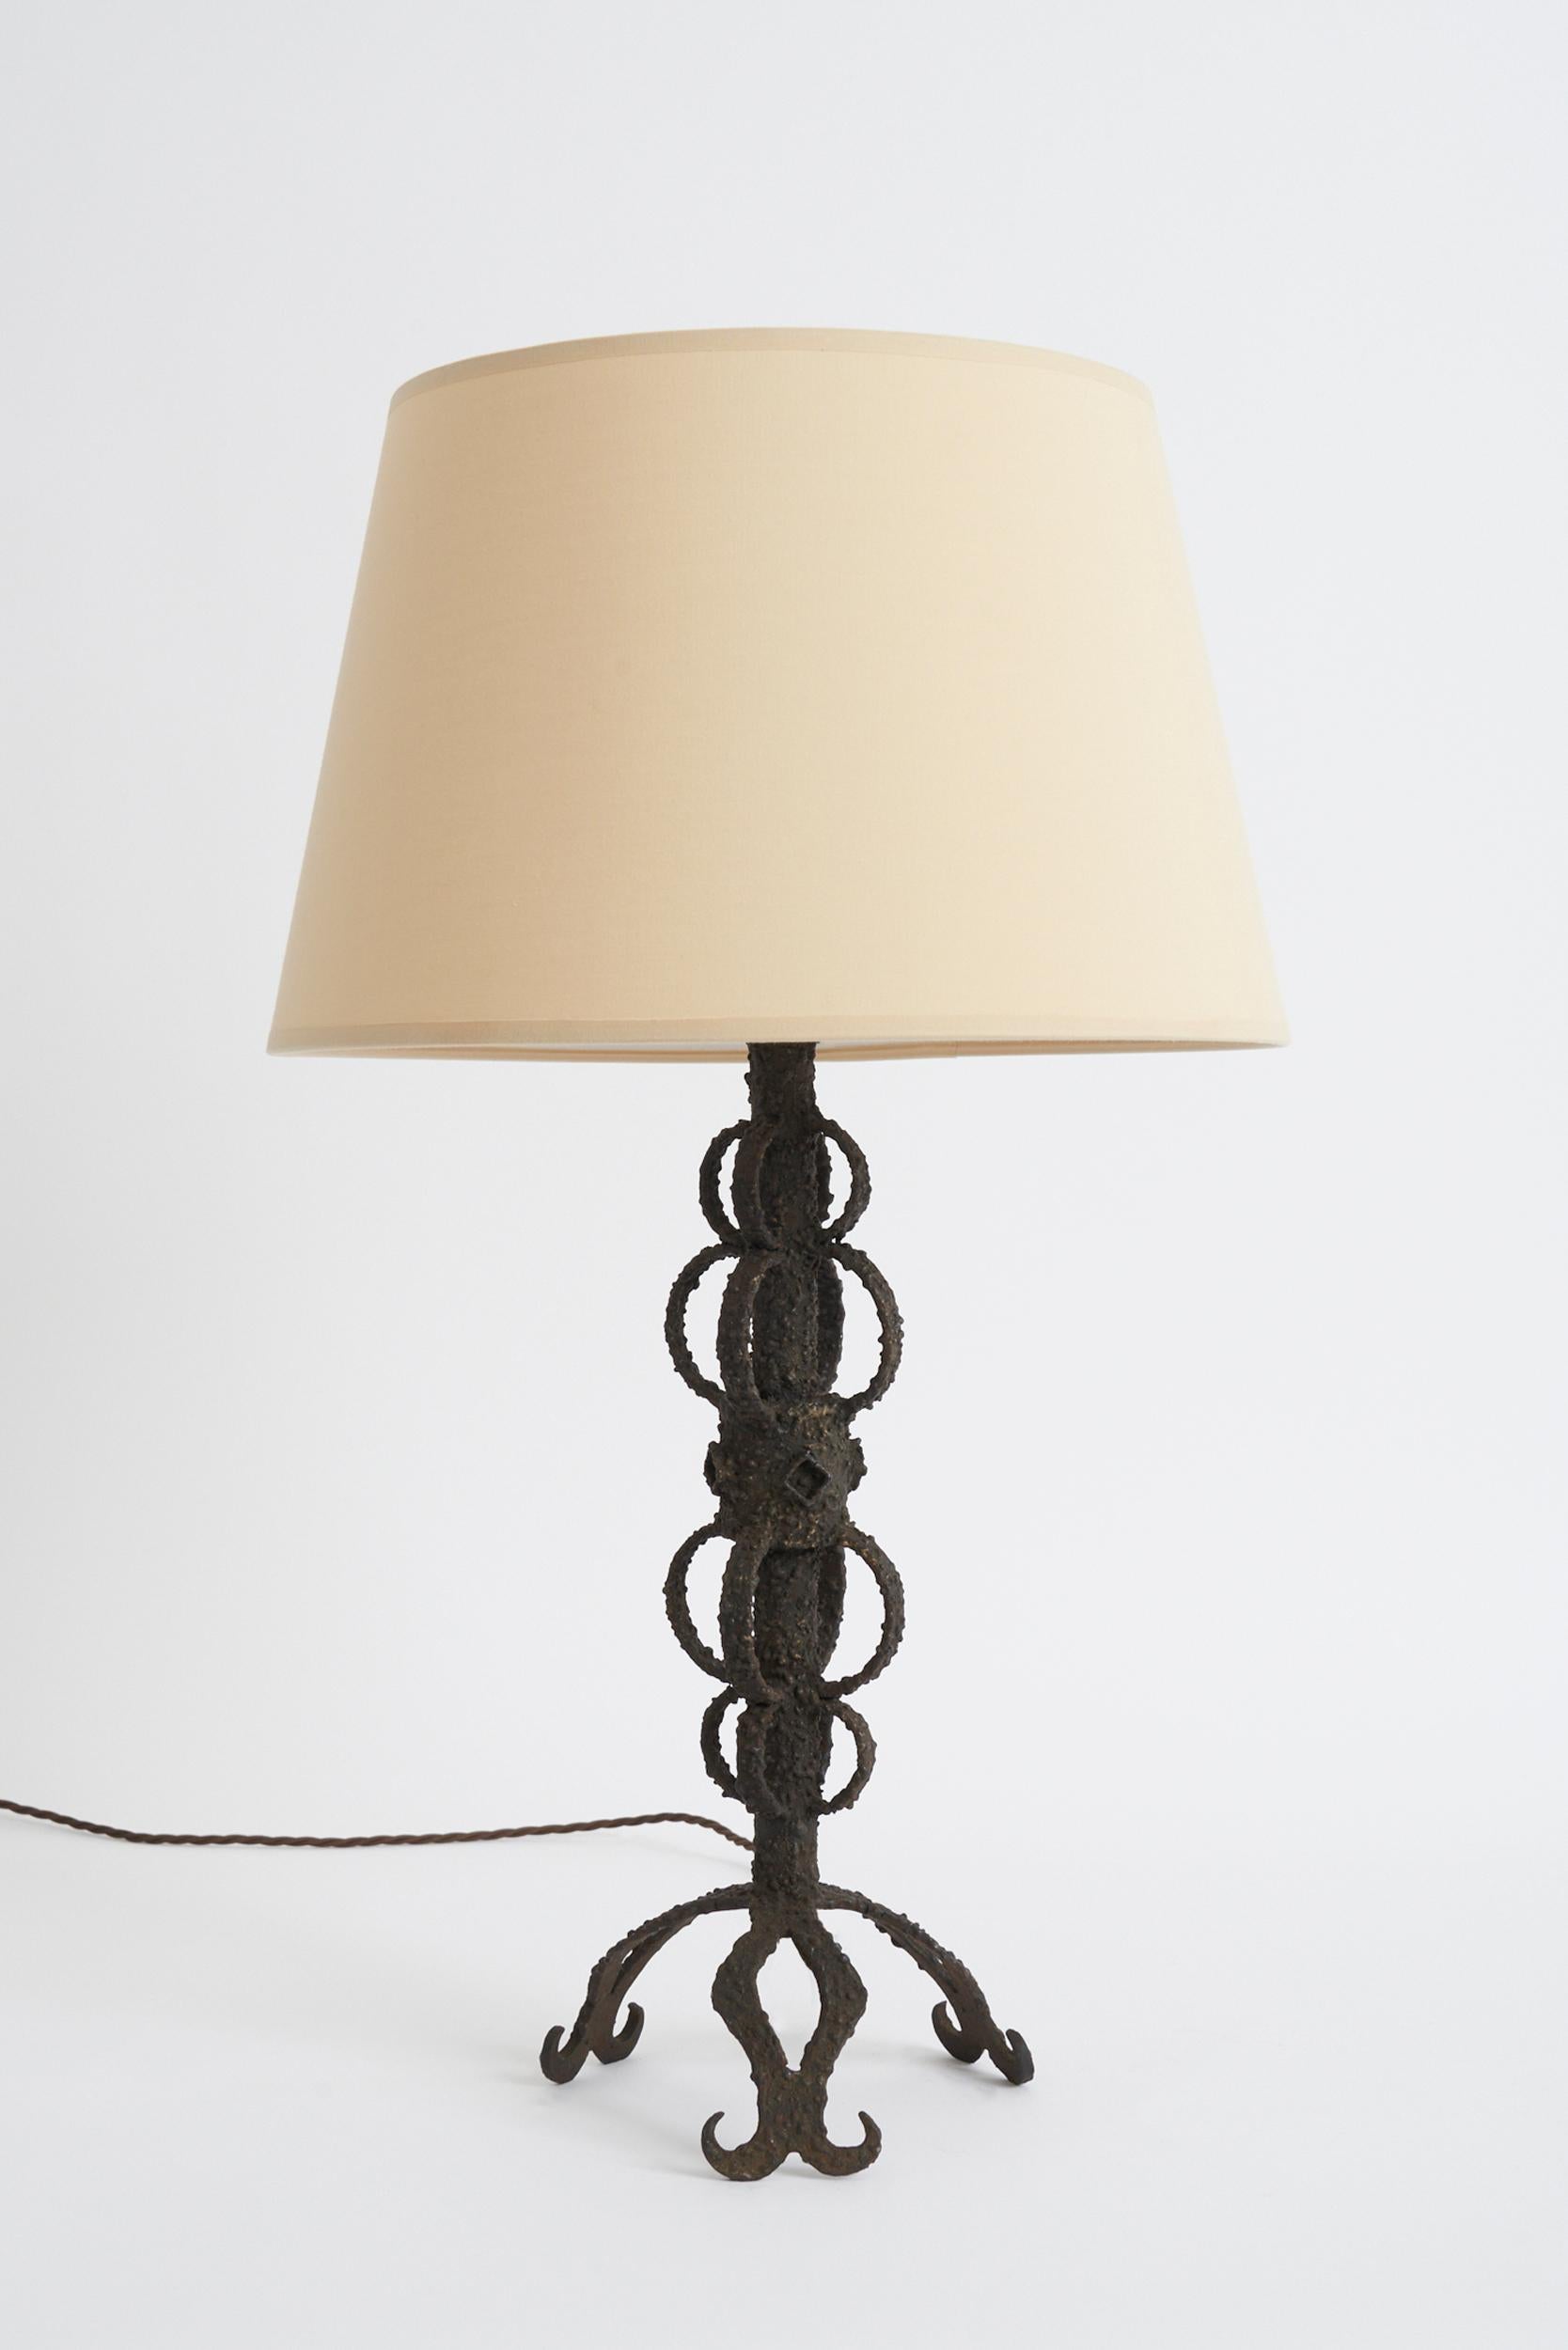 Spanish Pair of Brutalist Iron Table Lamps